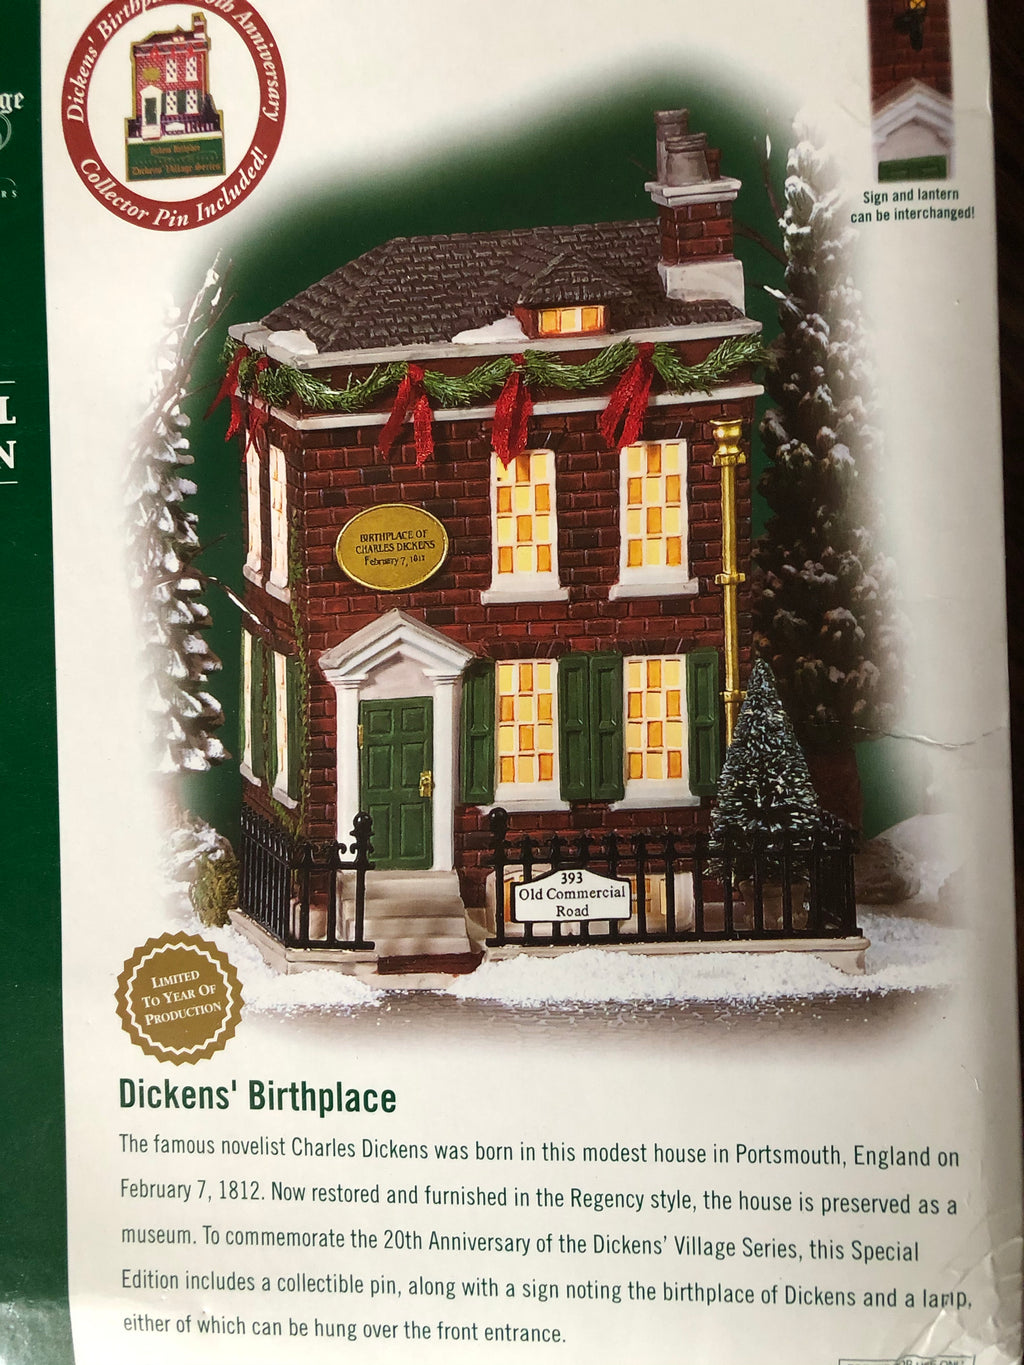 Dickens' Birthplace 20th Anniversary Special Edition